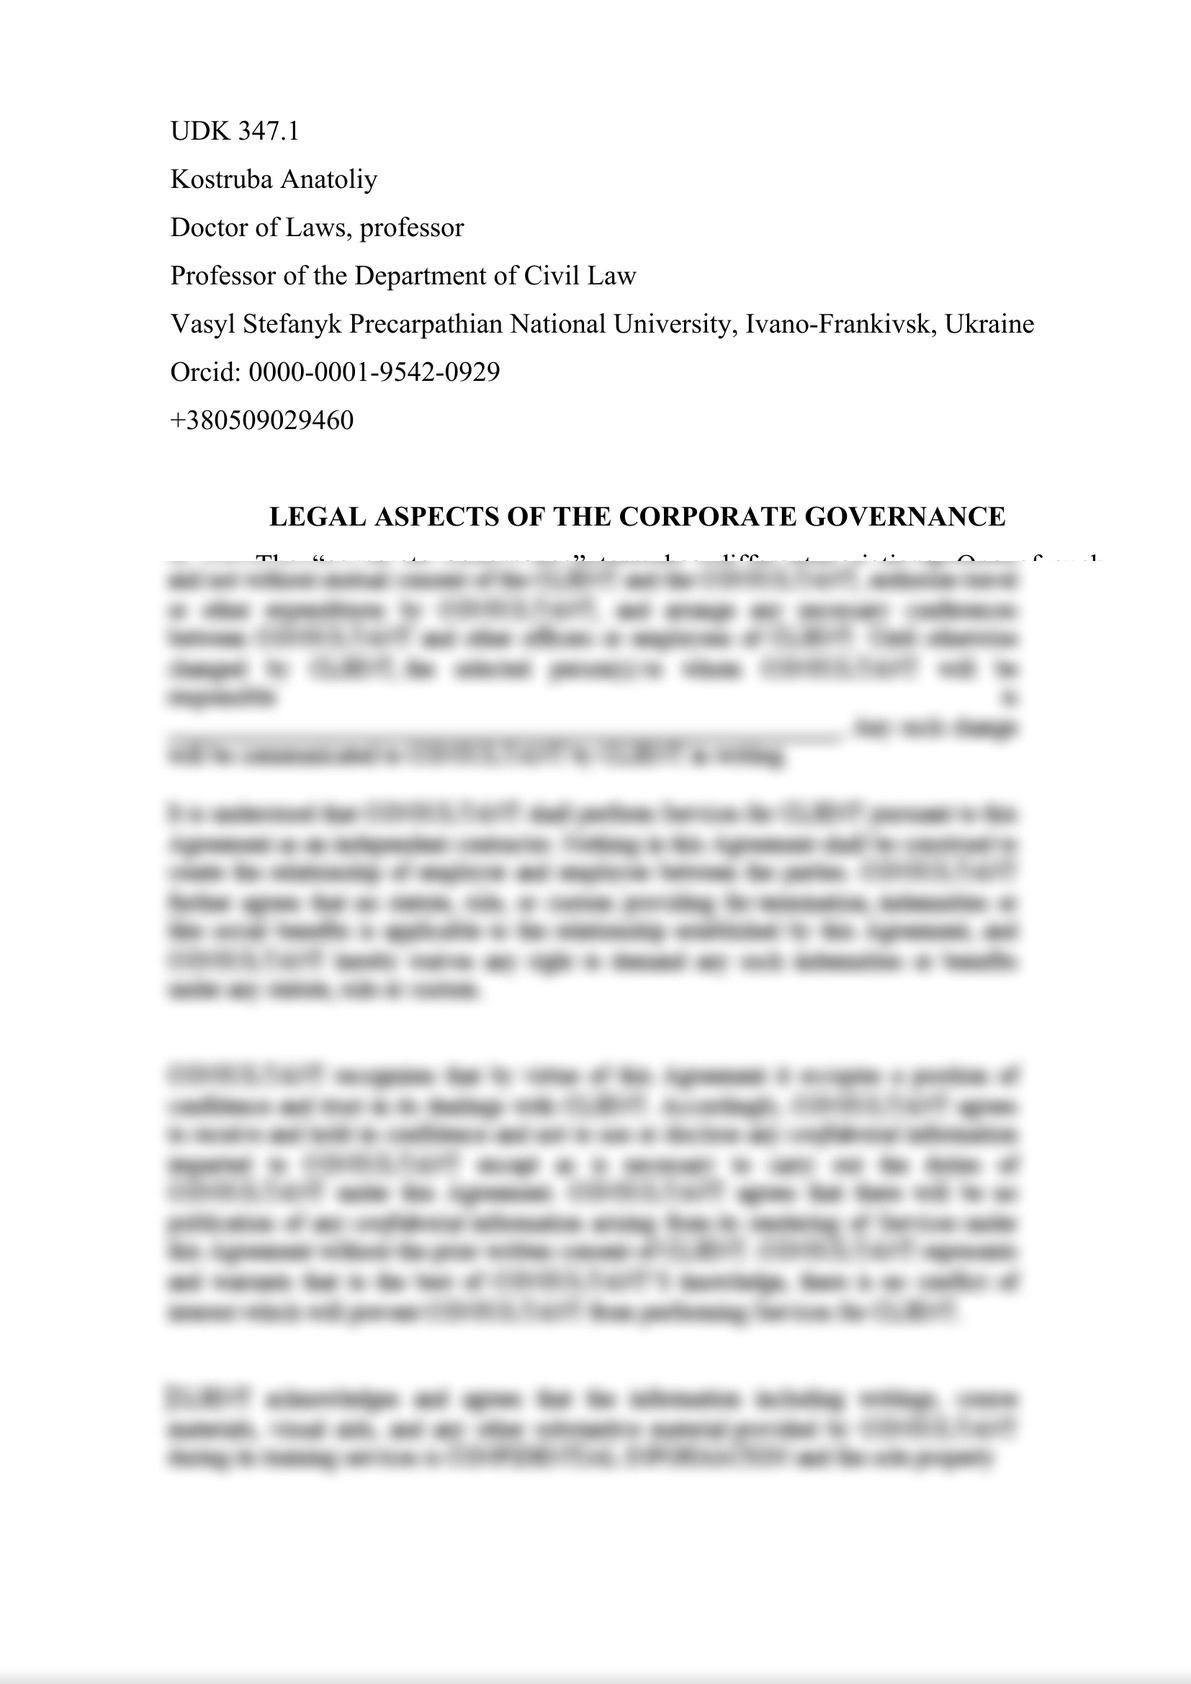 LEGAL ASPECTS OF THE CORPORATE GOVERNANCE-0